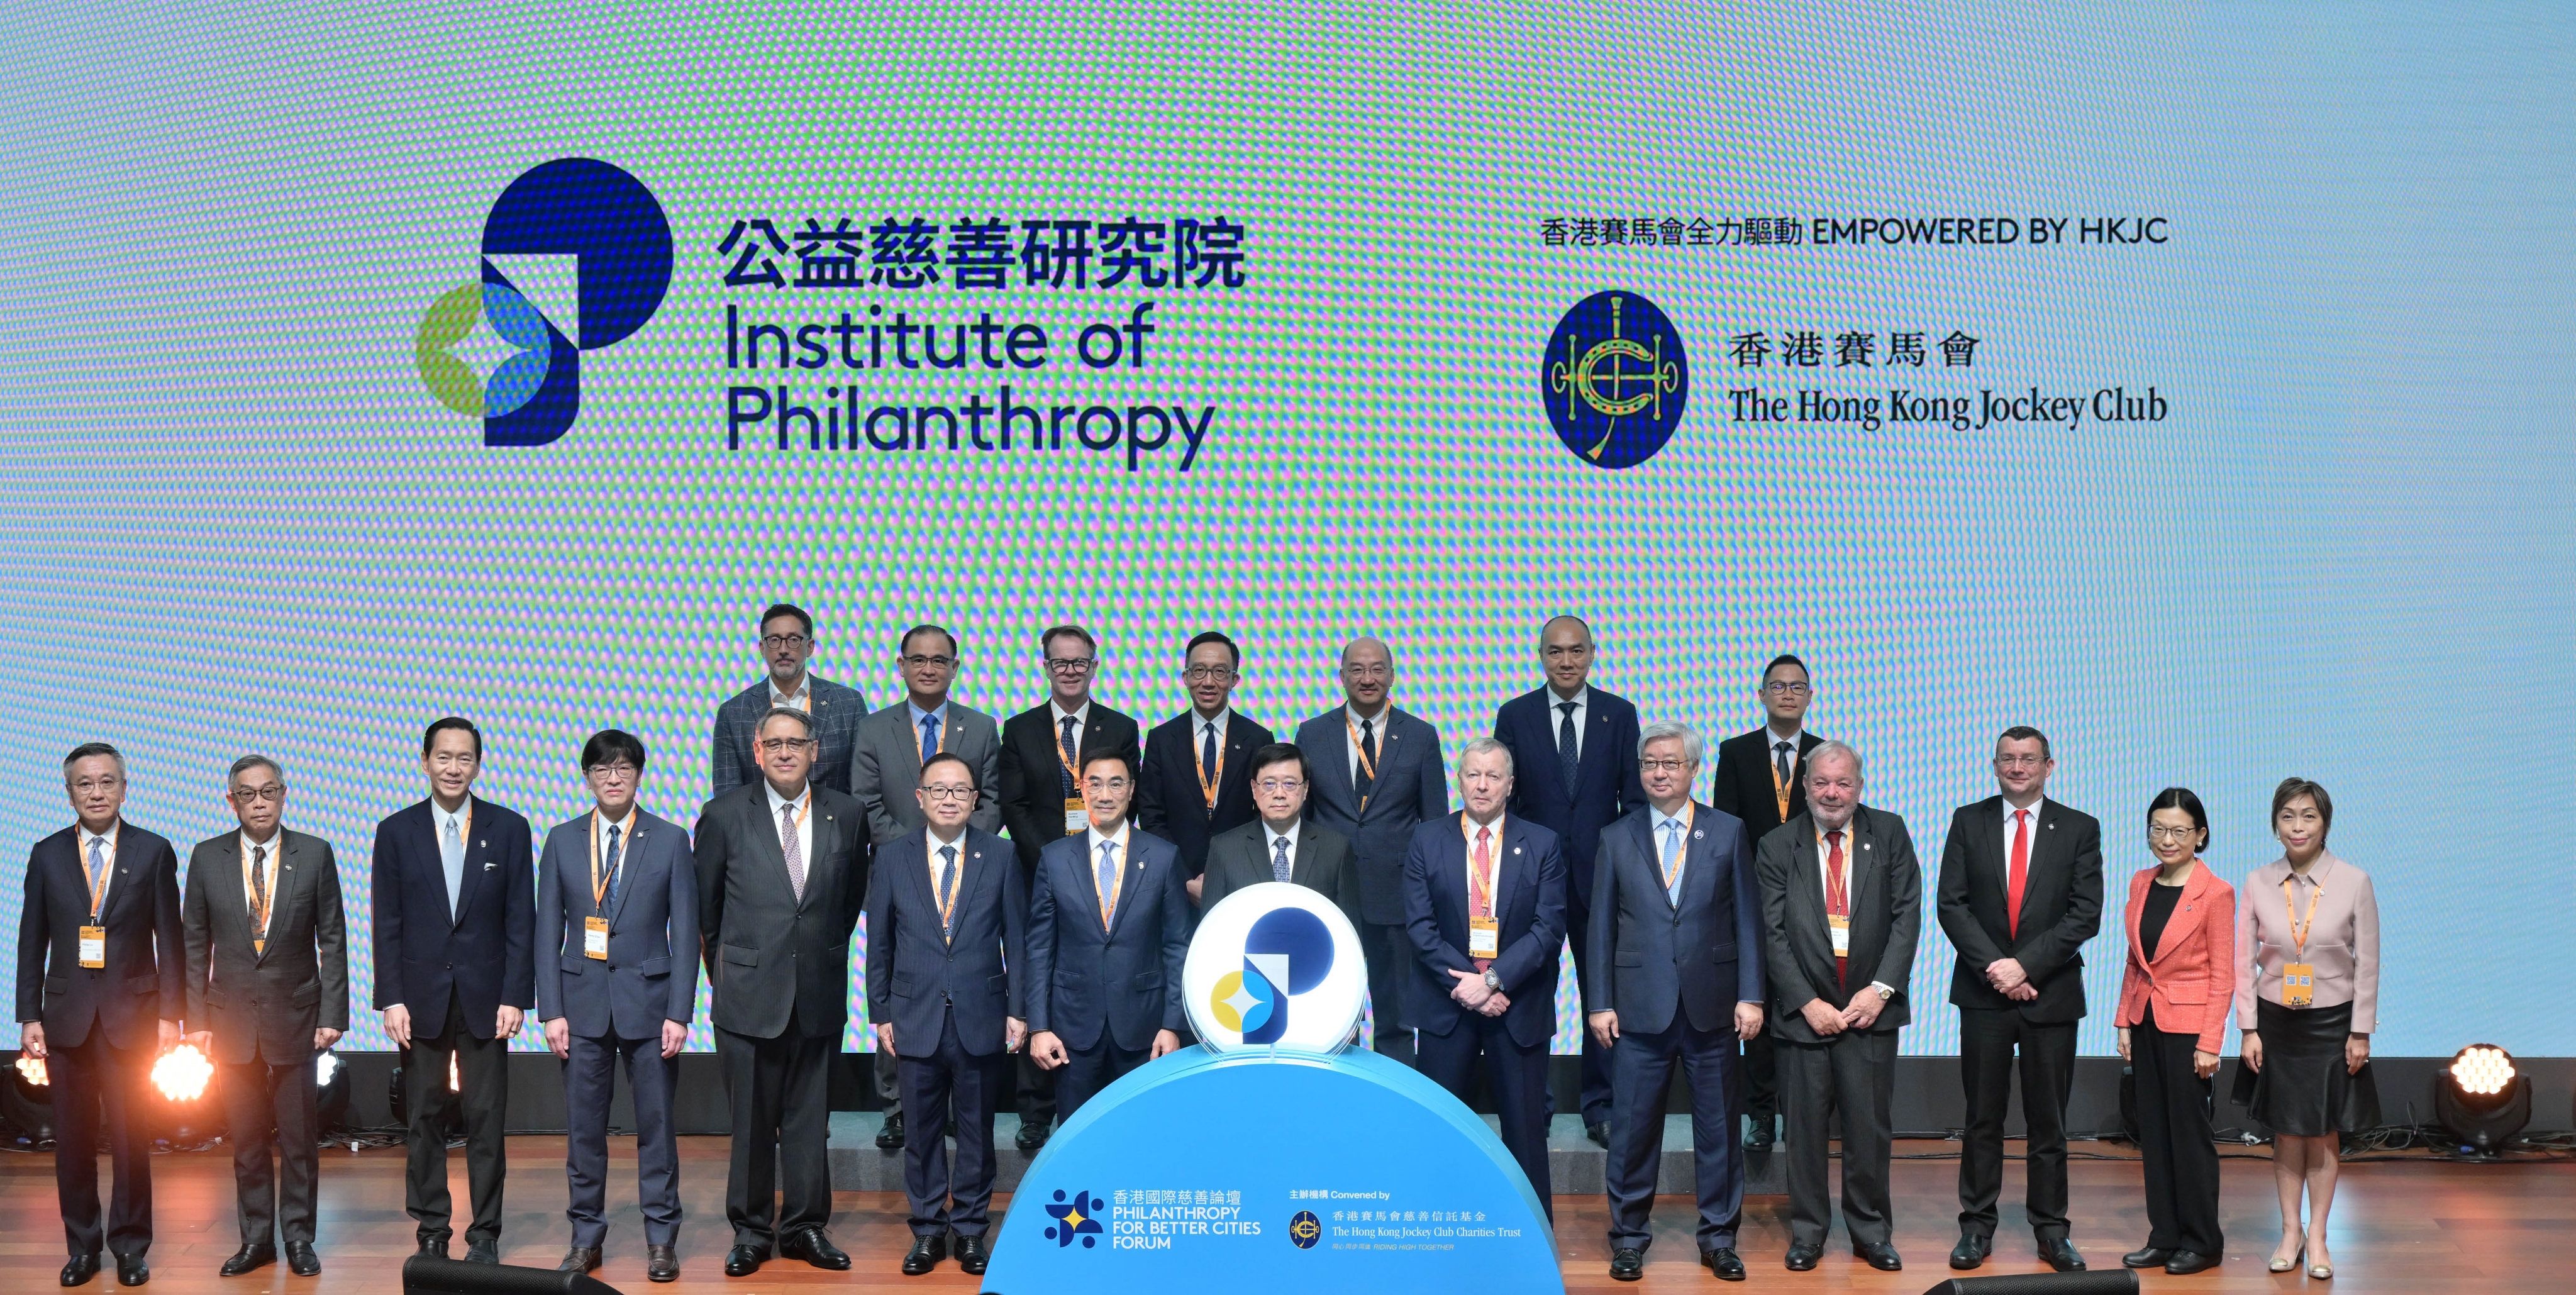 Delegates to the Hong Kong Jockey Club Charities Trust conference on building better cities through philanthropy. City leader John Lee is front, eighth from left. Photo: Handout